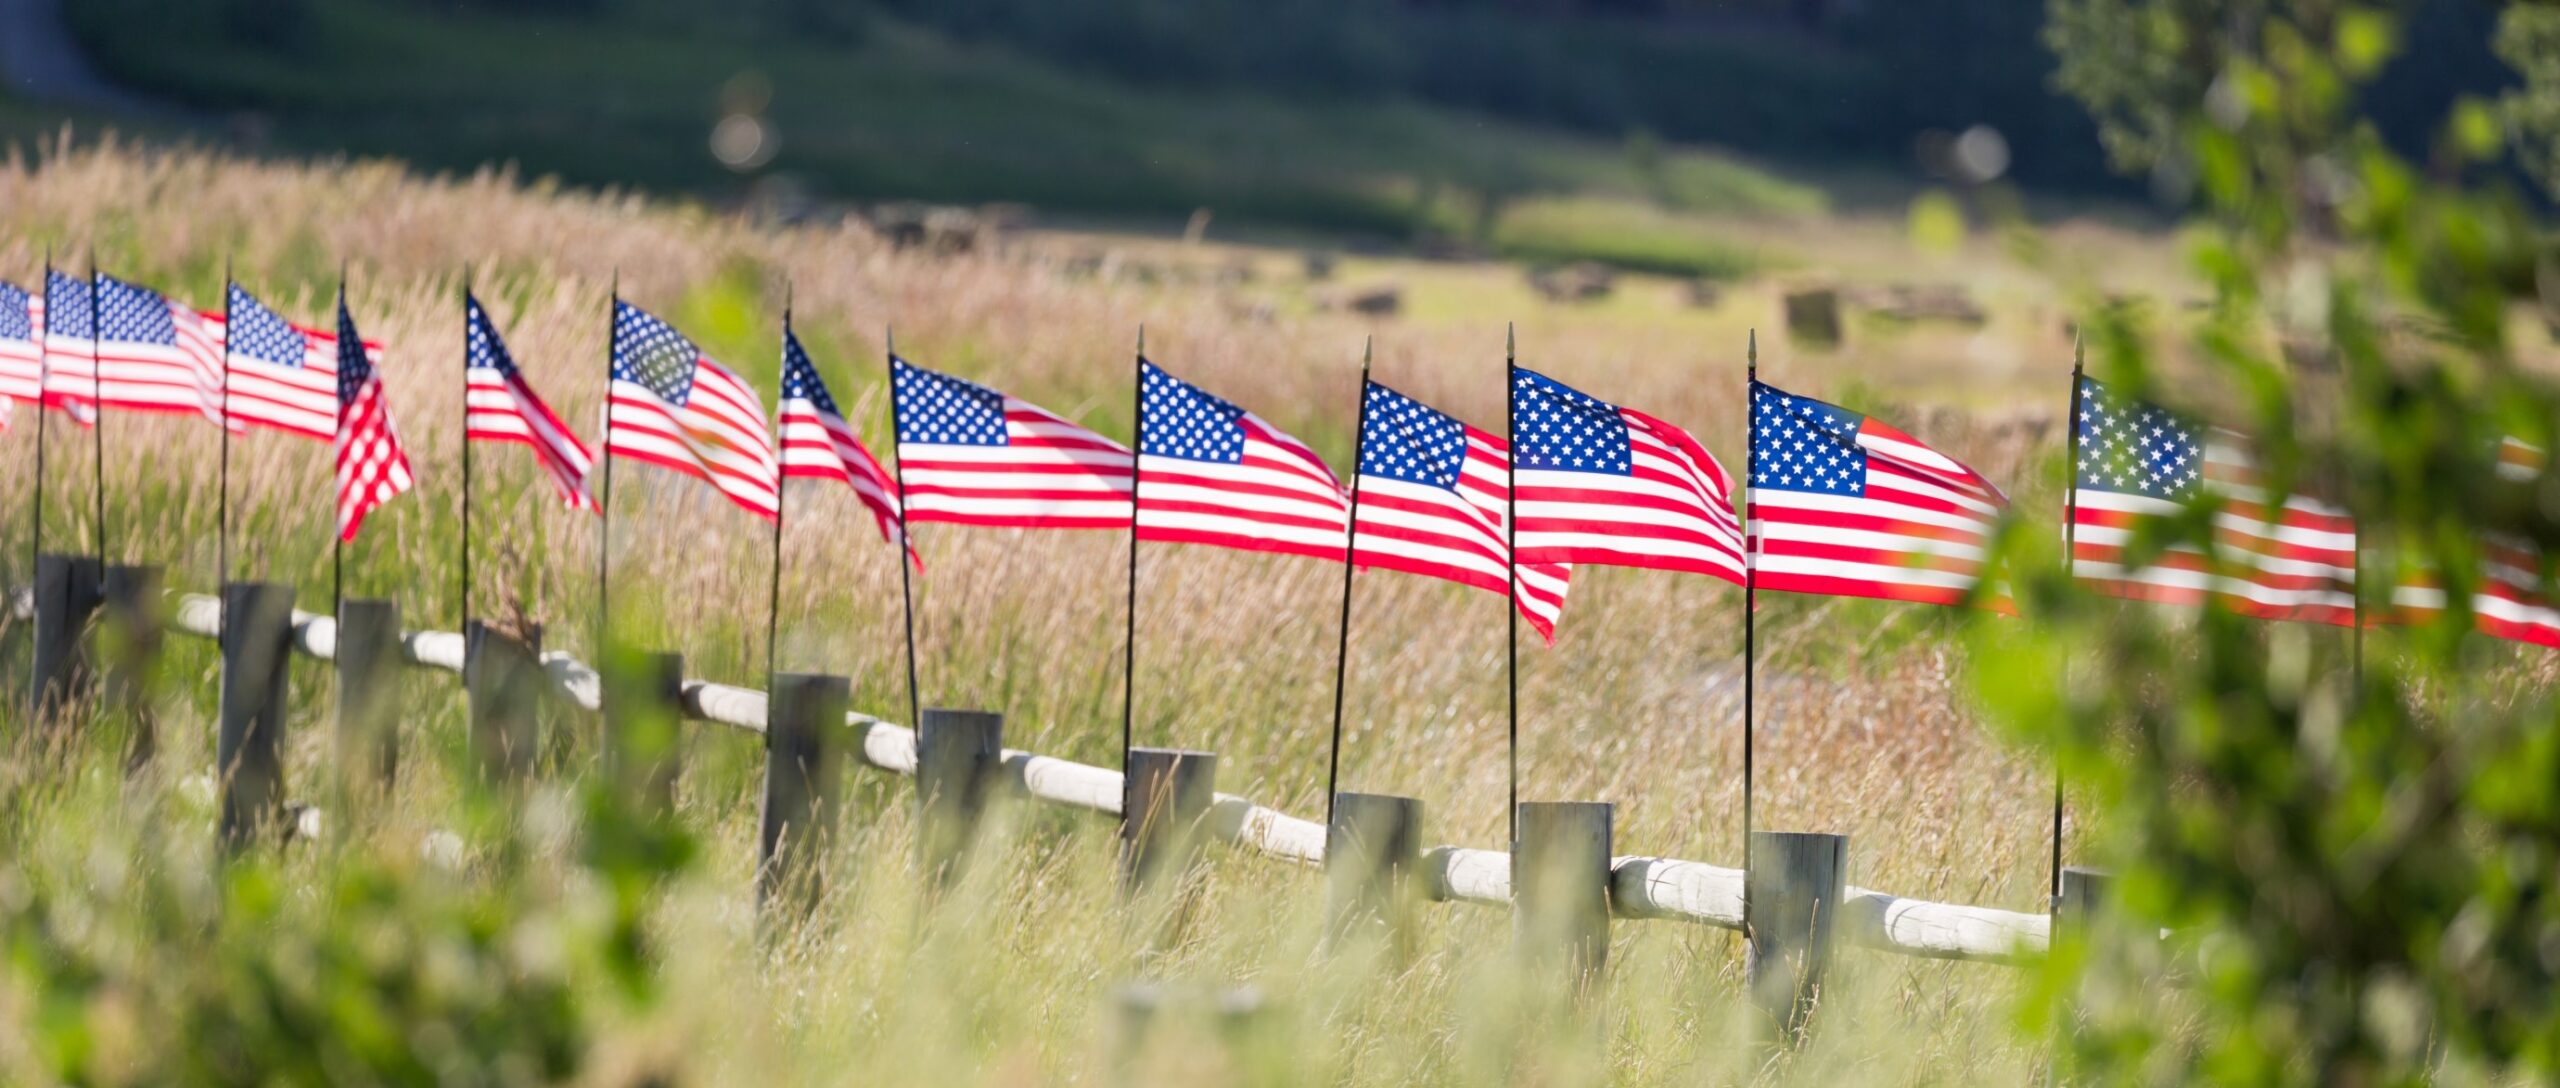 United States Flags in a field